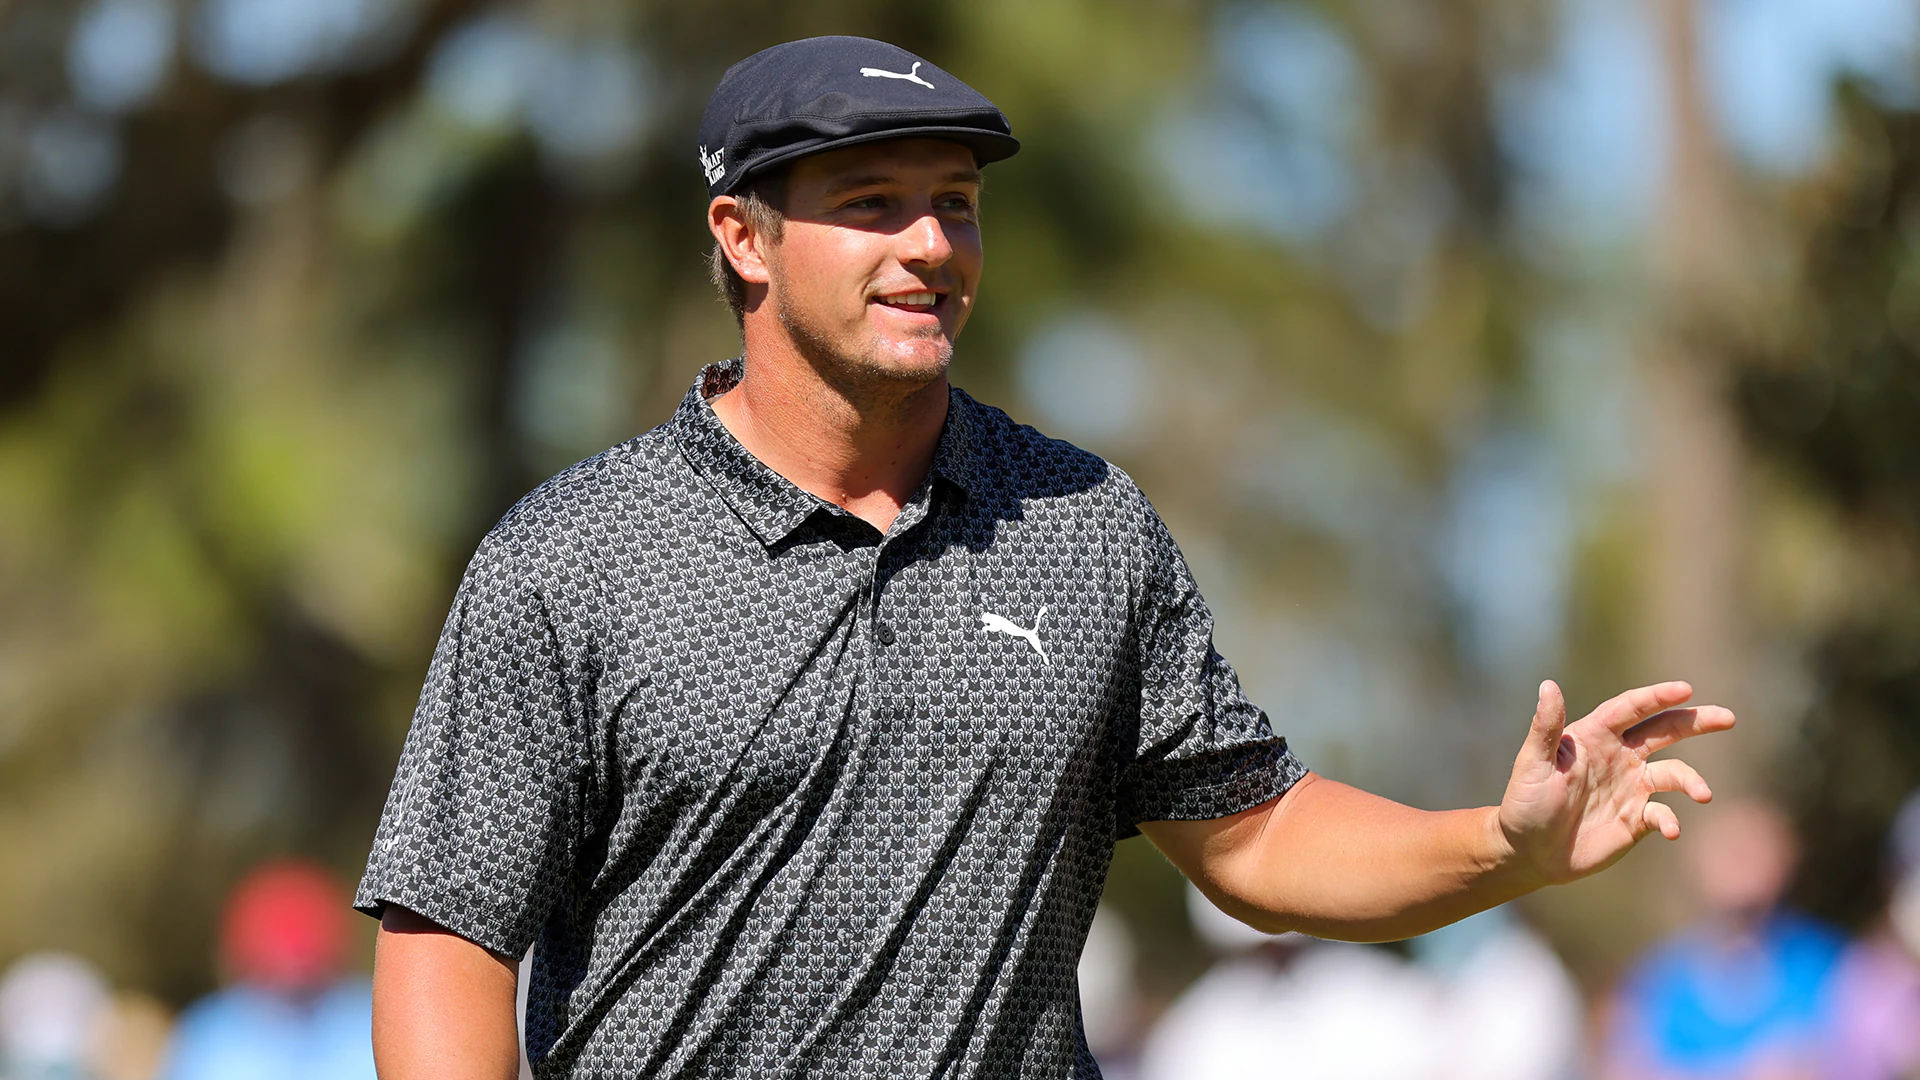 Bryson DeChambeau (69) shows restraint, learned his lesson about sharing plans